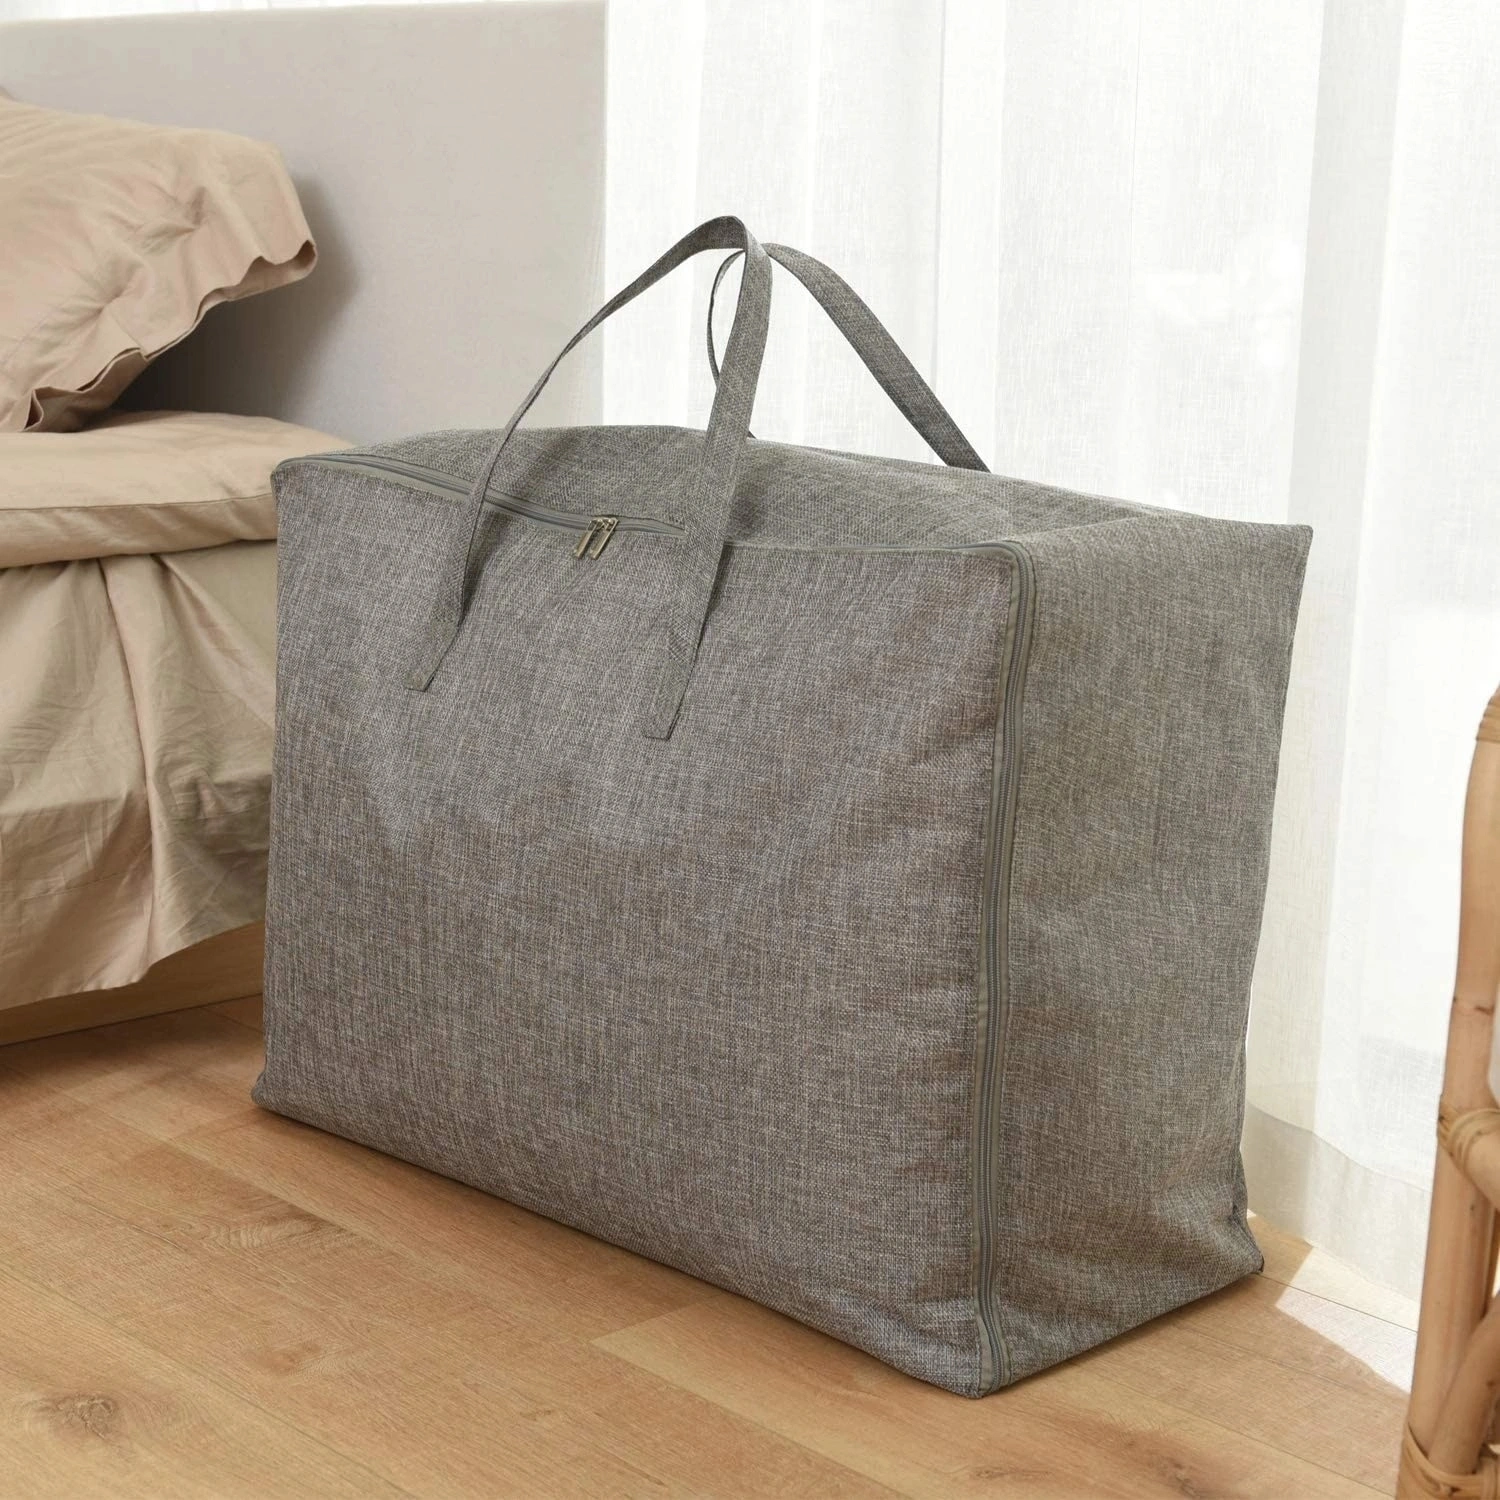 Anyo 105L Extra Large Lead Free Tote Bag Fabric Clothes Storage Bag Organizer